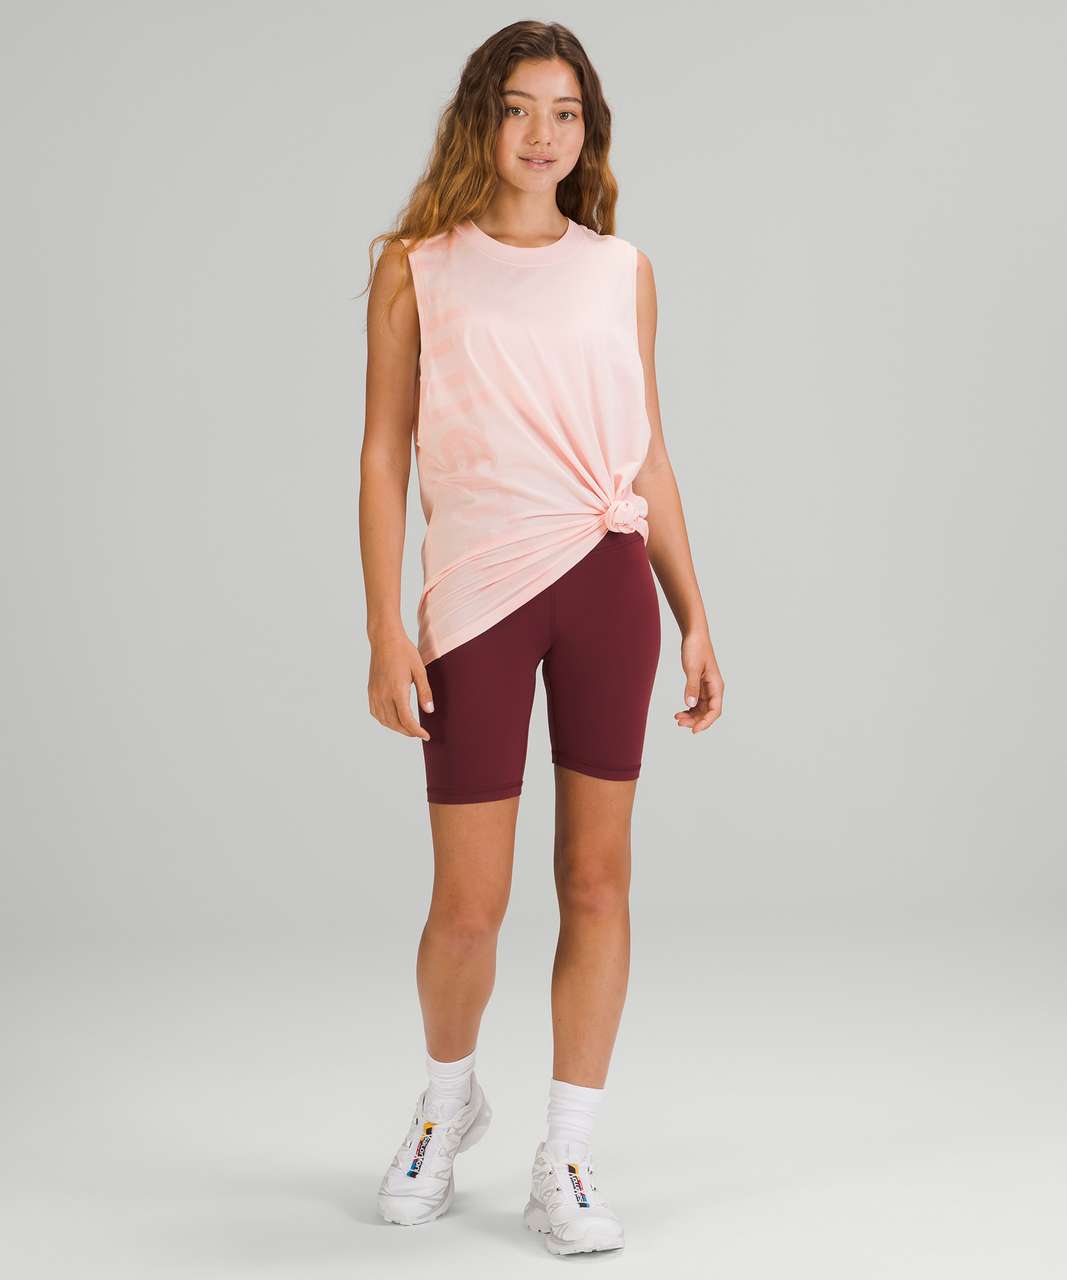 Lululemon All Yours Tank Top *Graphic - Pink Mist